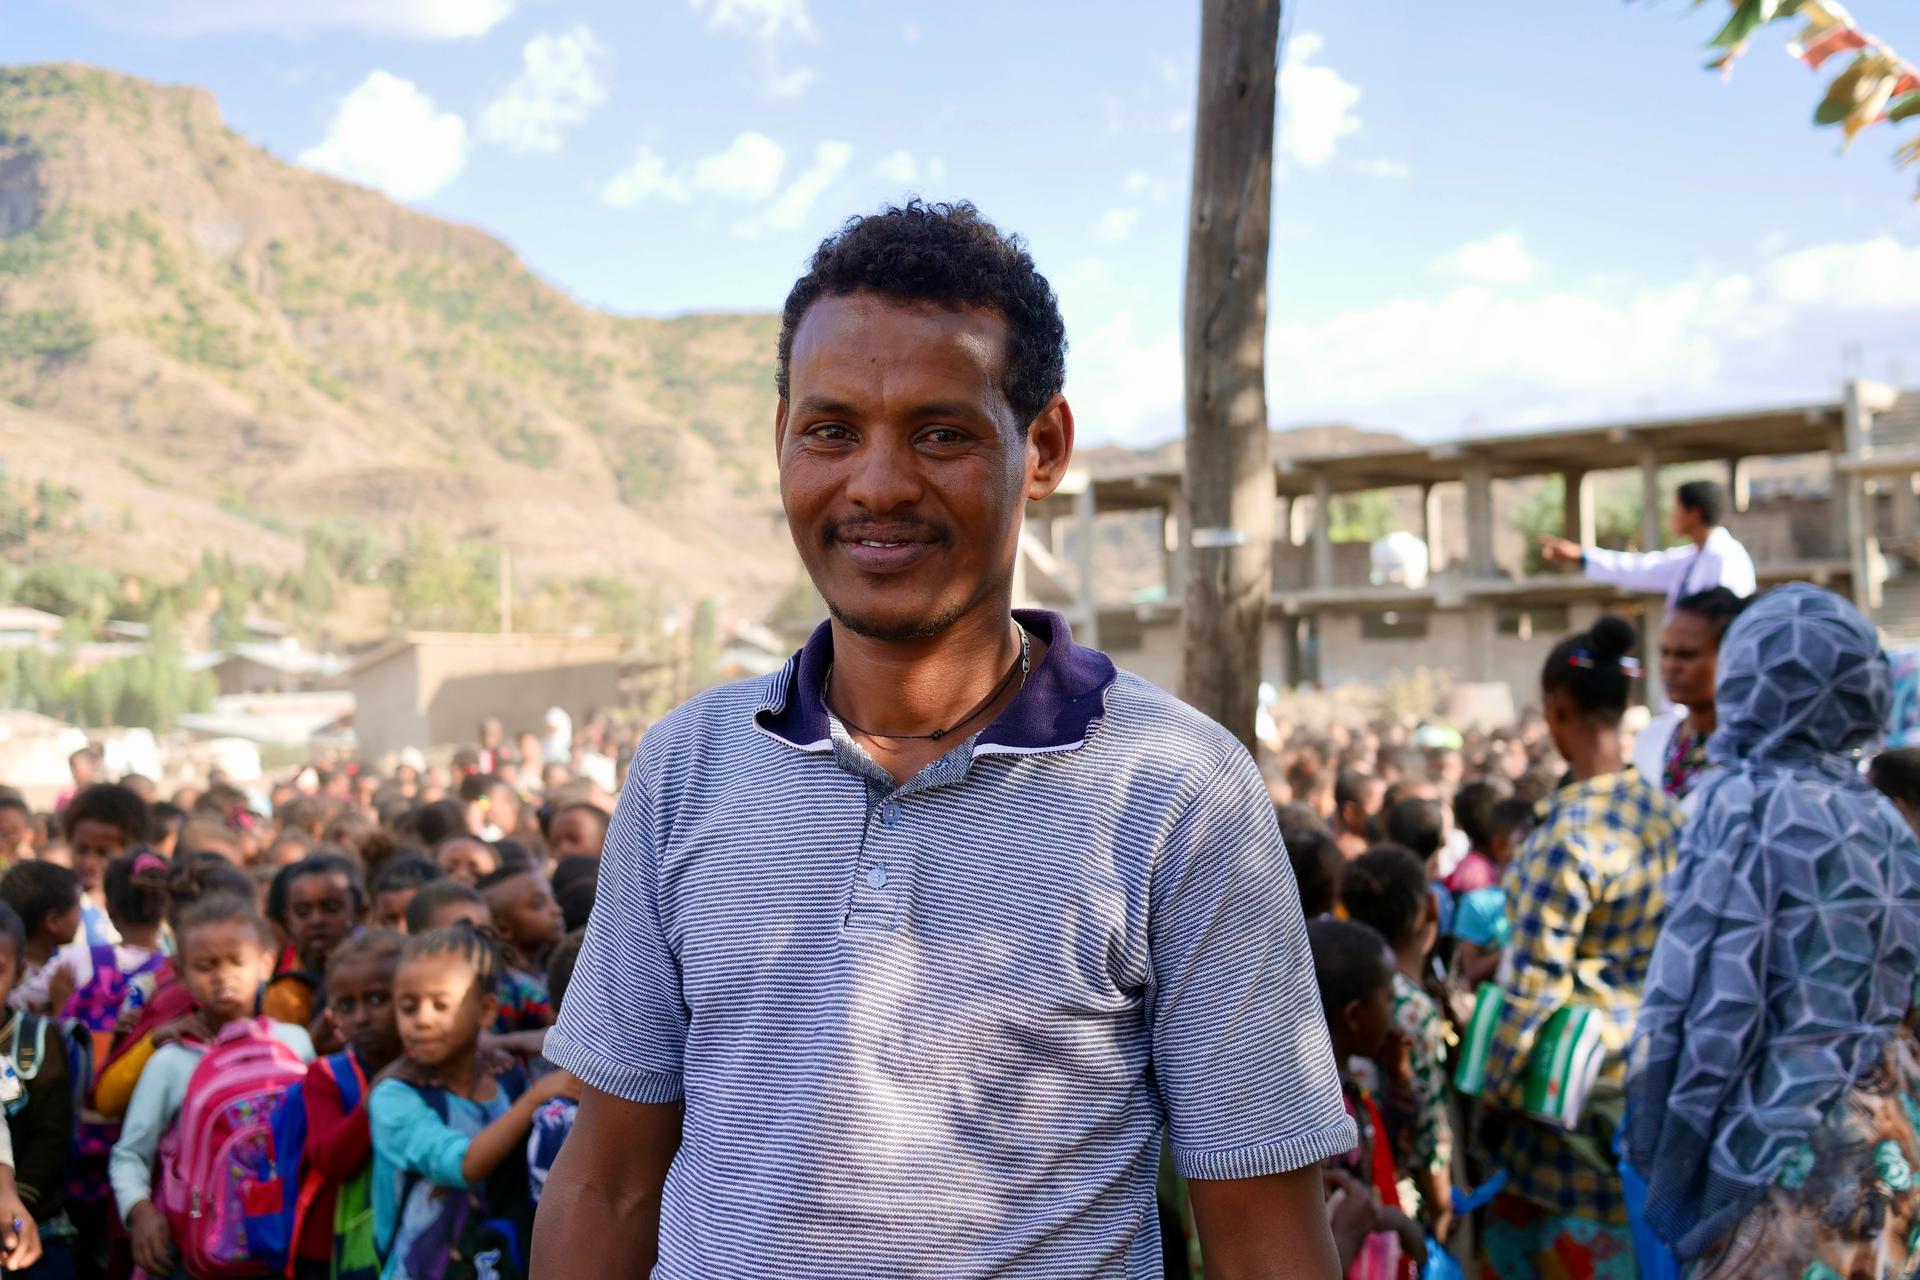 Principal Roda Sisay in front of a recently reopened school in Lalibela, Ethiopia, Feb. 15, 2022.